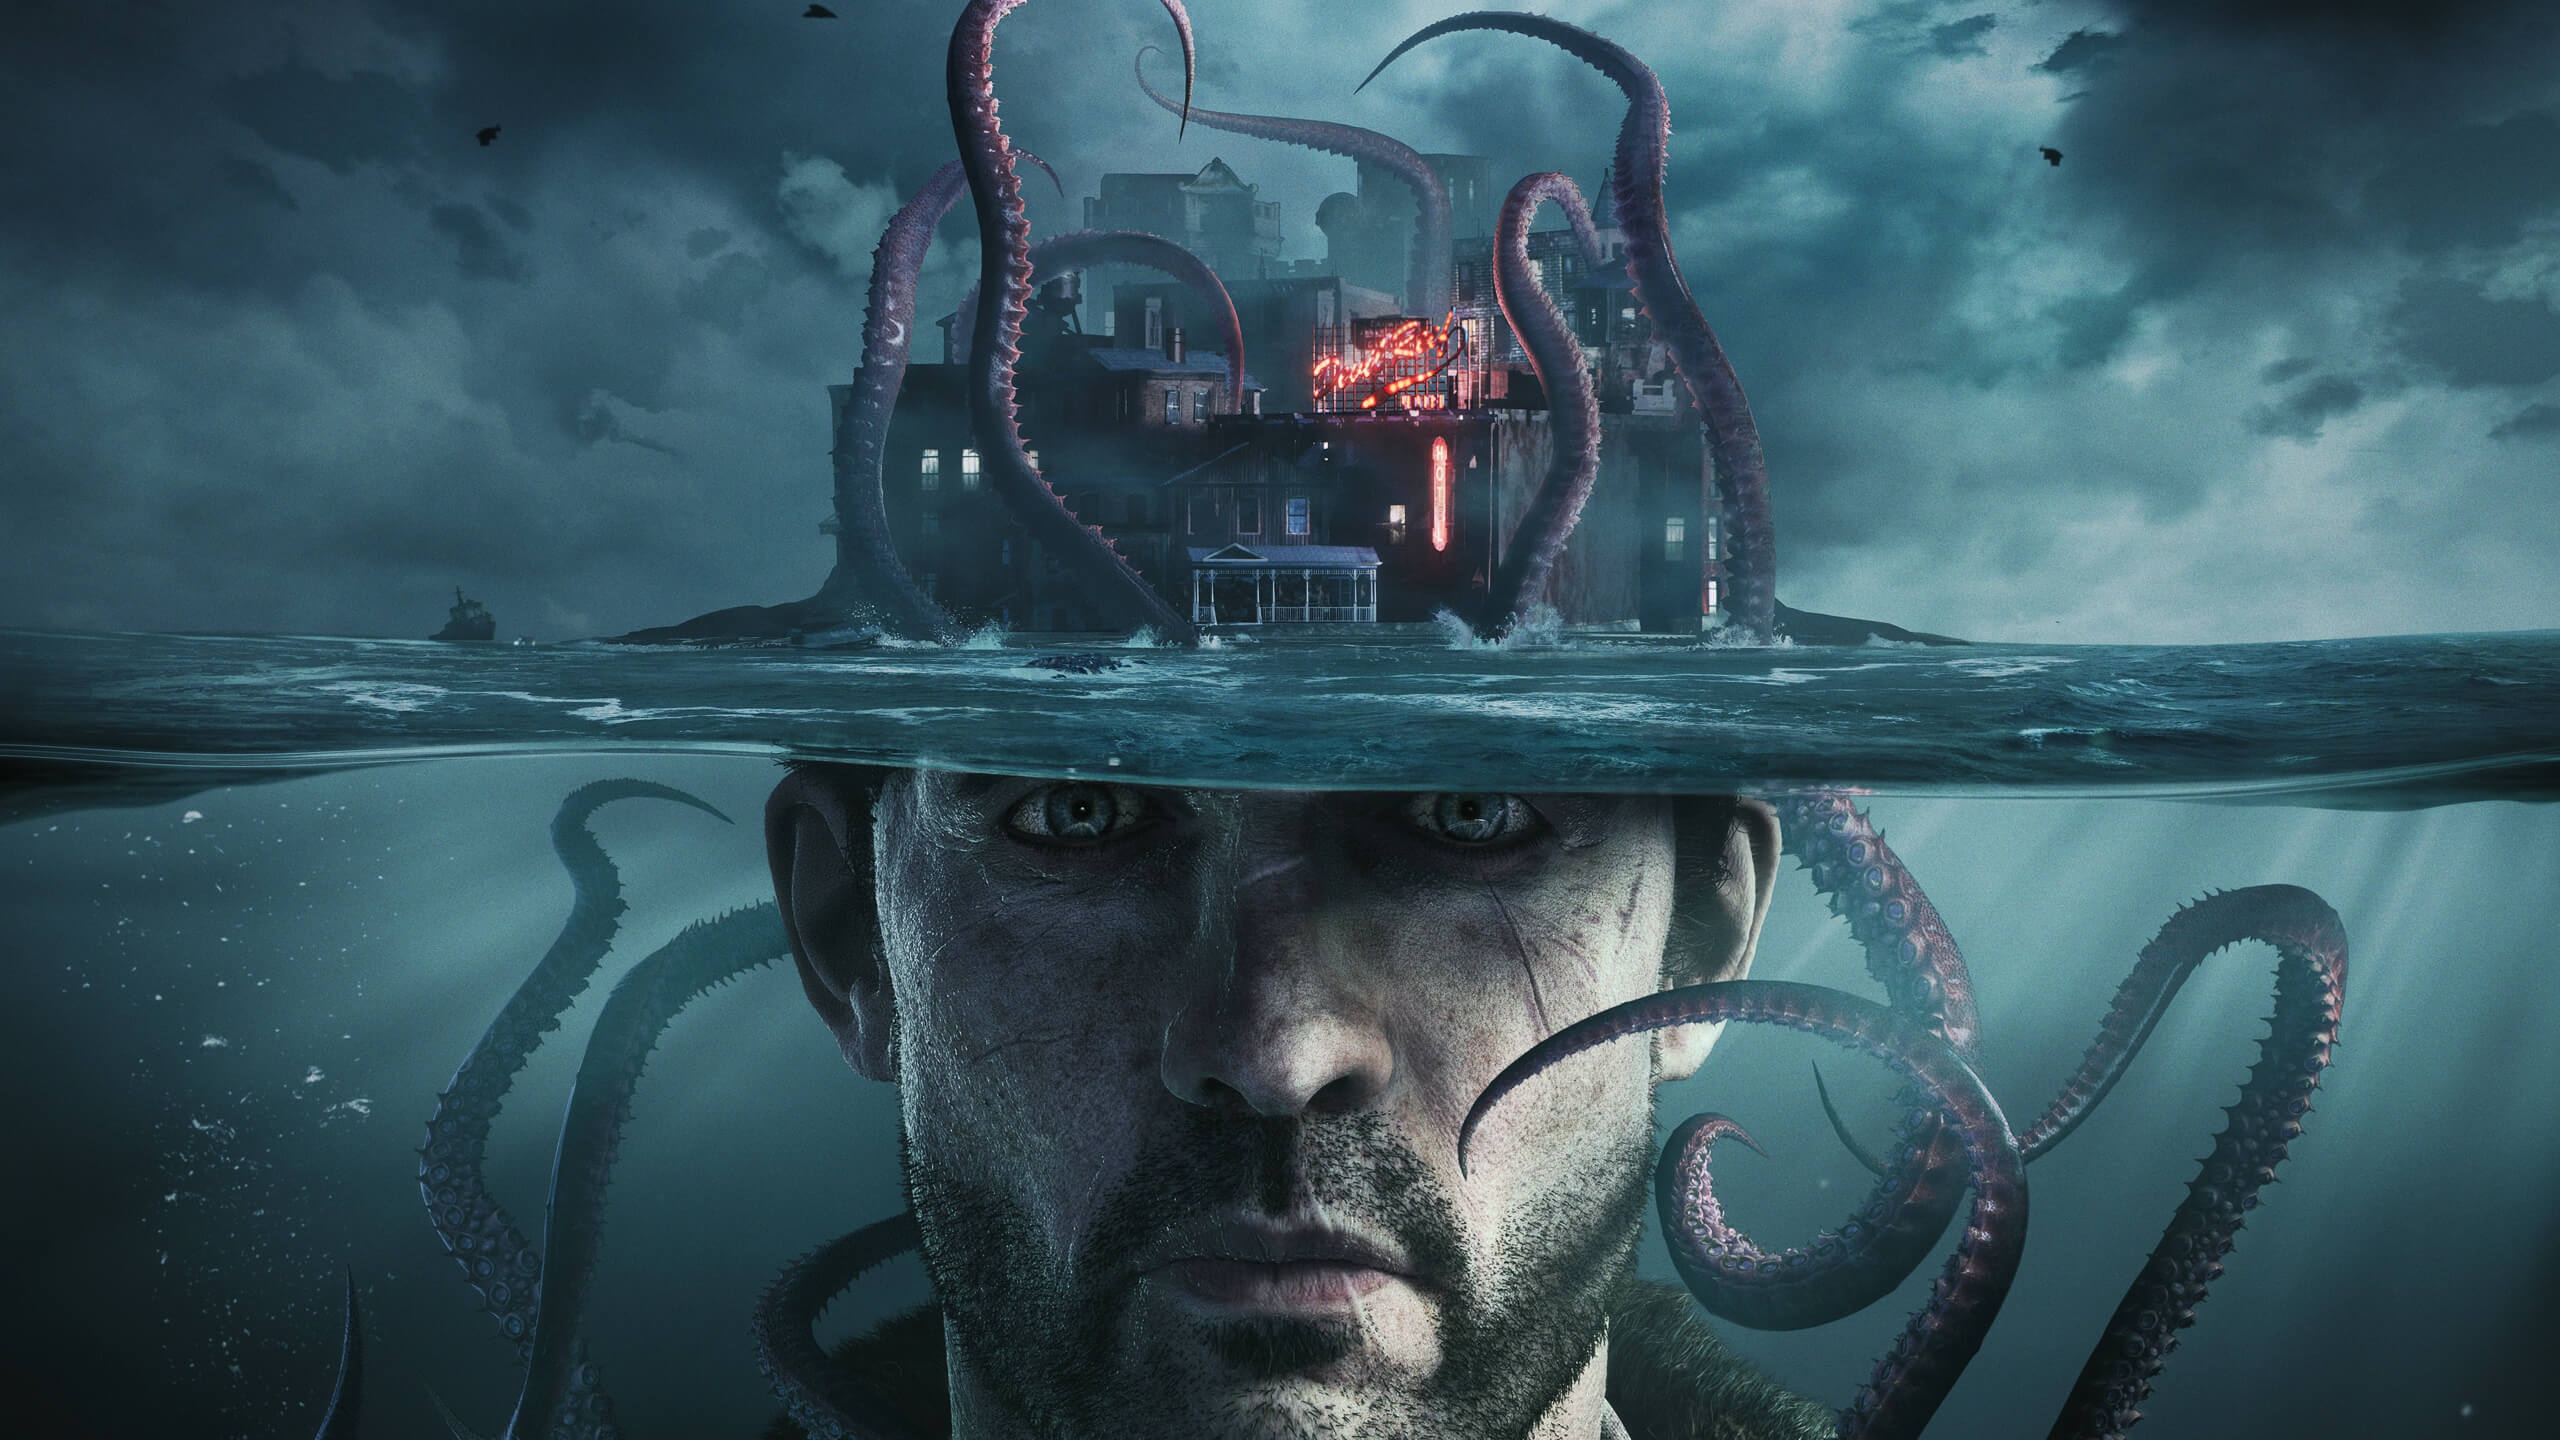 download the sinking city pc for free